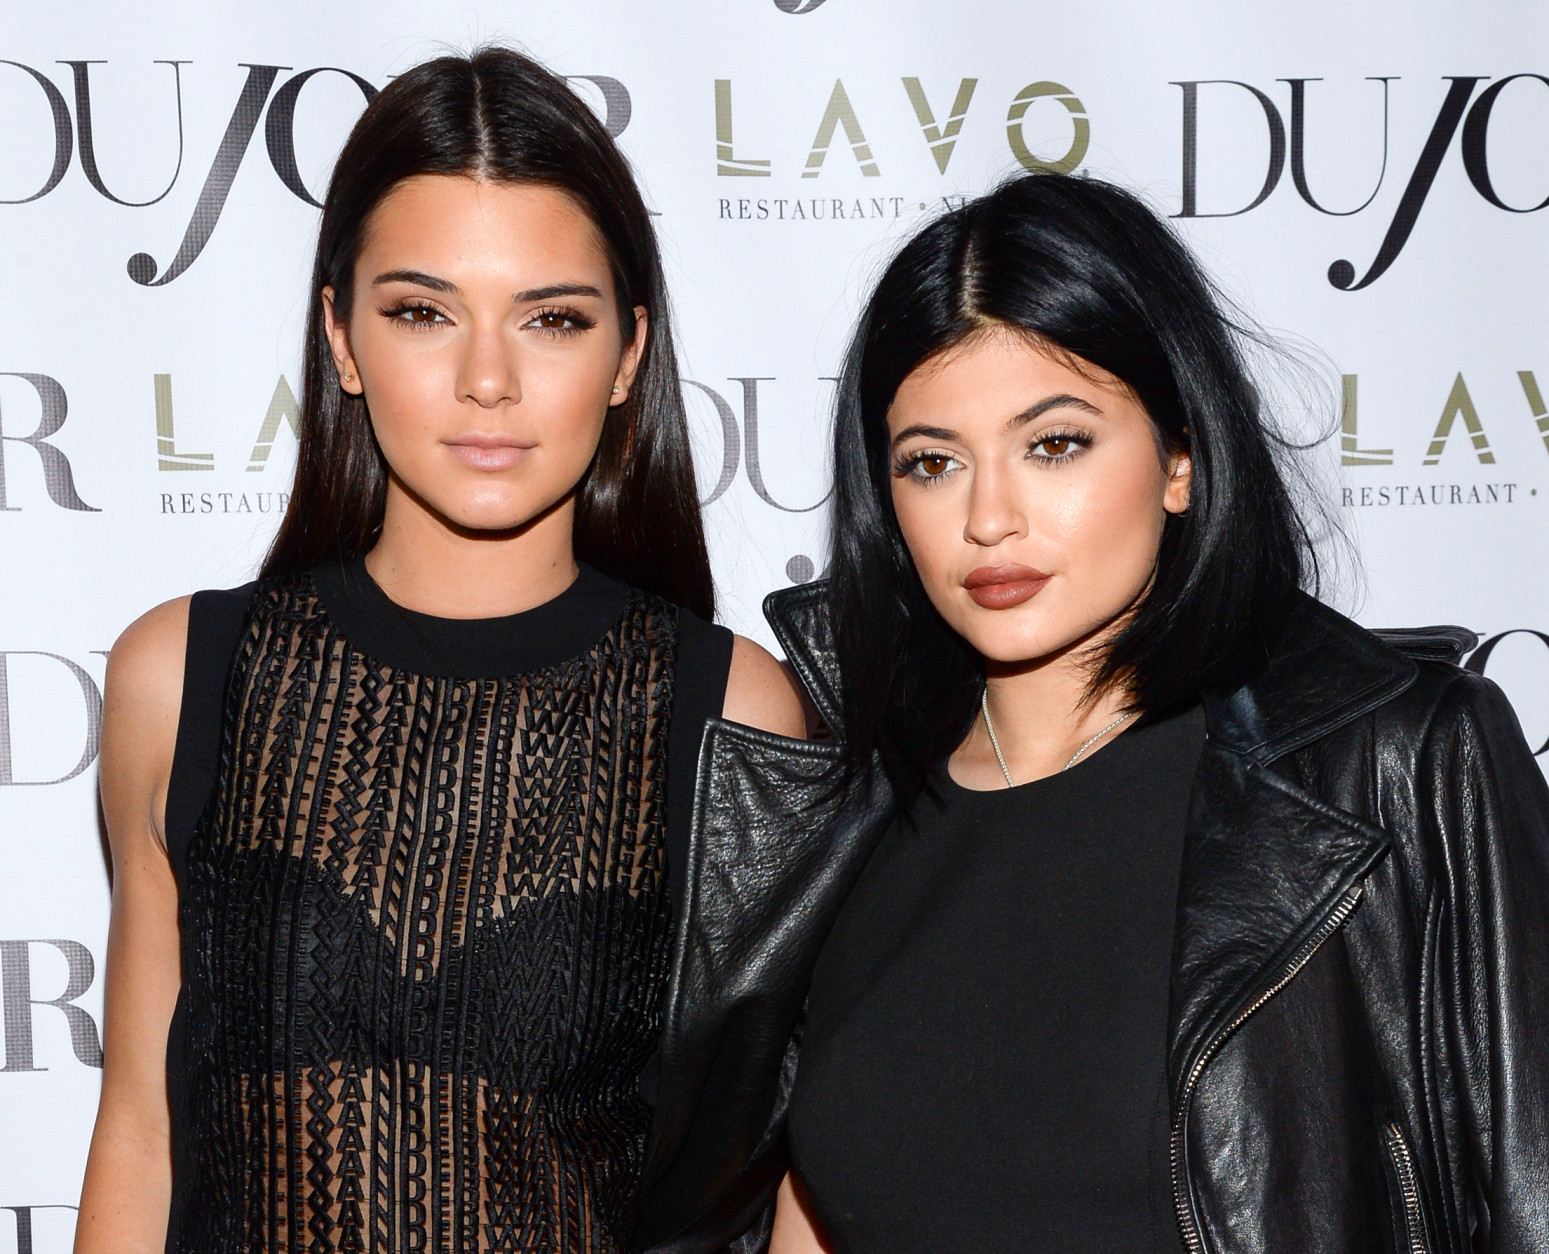 FILE - In this Aug. 28, 2014 file photo, Kendall Jenner, left, and Kylie Jenner celebrate DuJour's Fall Issue in New York. The mobile video game developer responsible for the popular Kim Kardashian: Hollywood game announced plans Tuesday, March 17, 2015, to develop a title starring Kardashian half-sisters Kendall and Kylie Jenner. (Photo by Evan Agostini/Invision/AP, File)